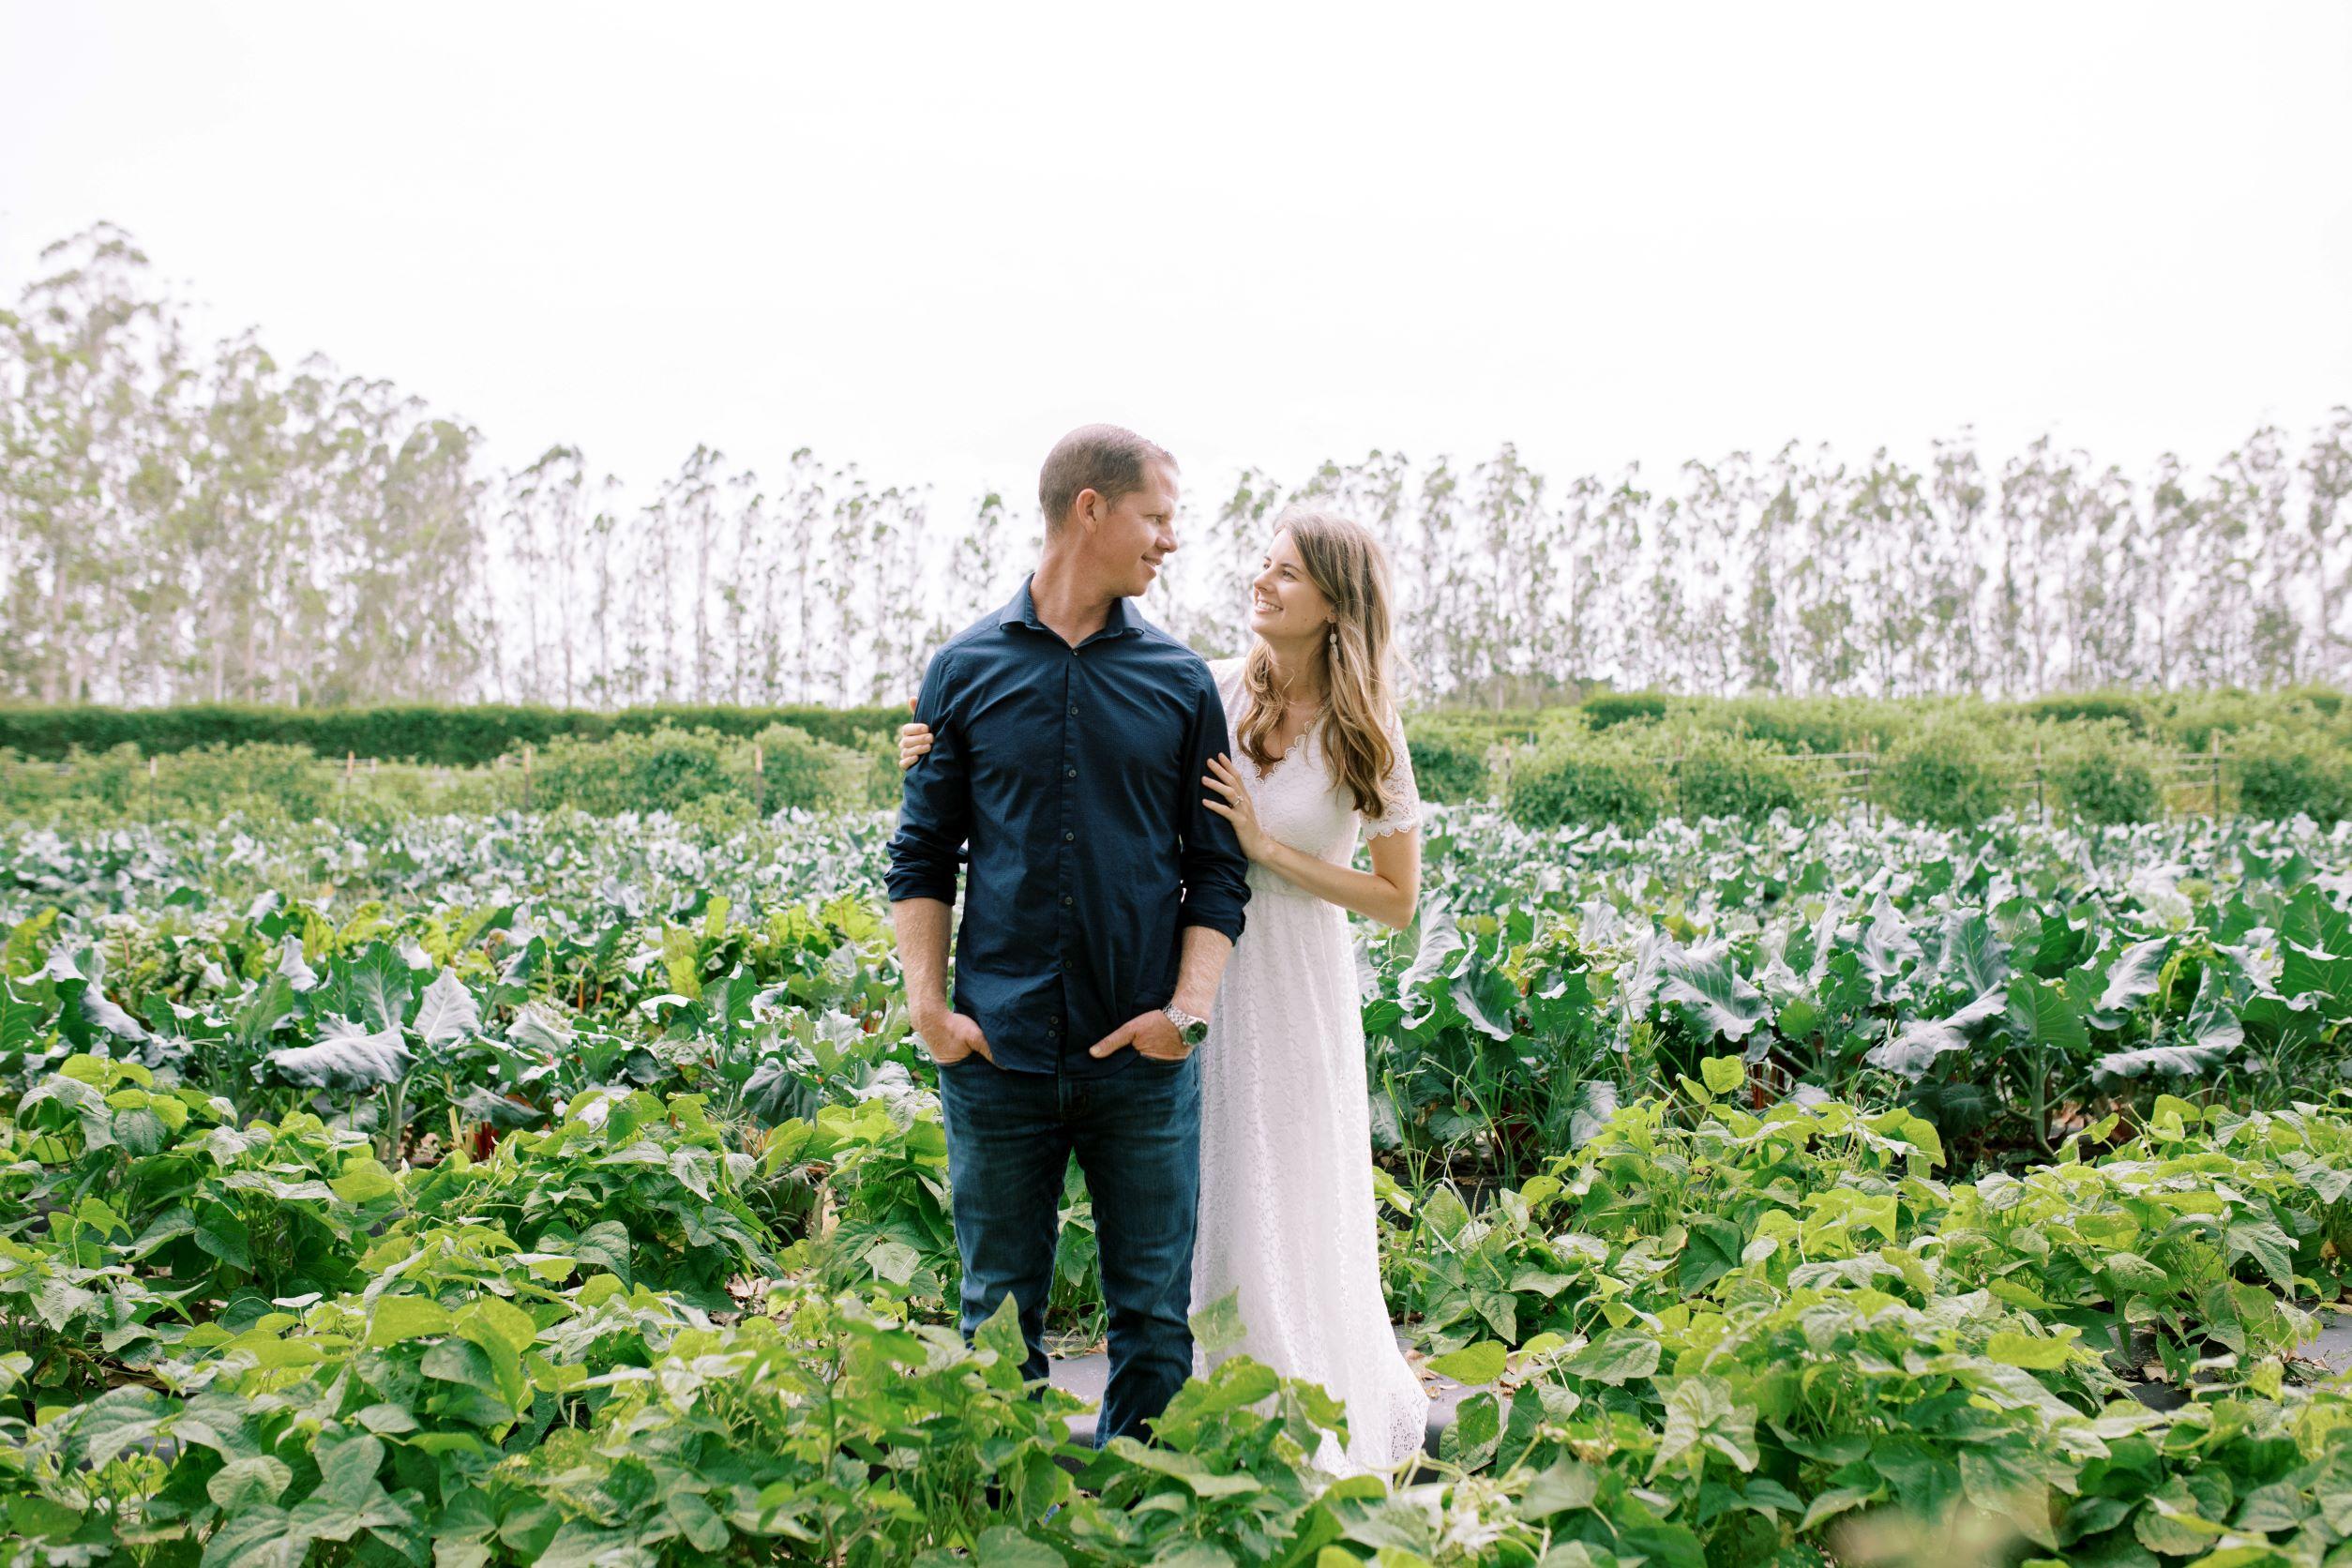 The Wedding Website of Ashleigh Hiler and Michael Knepper